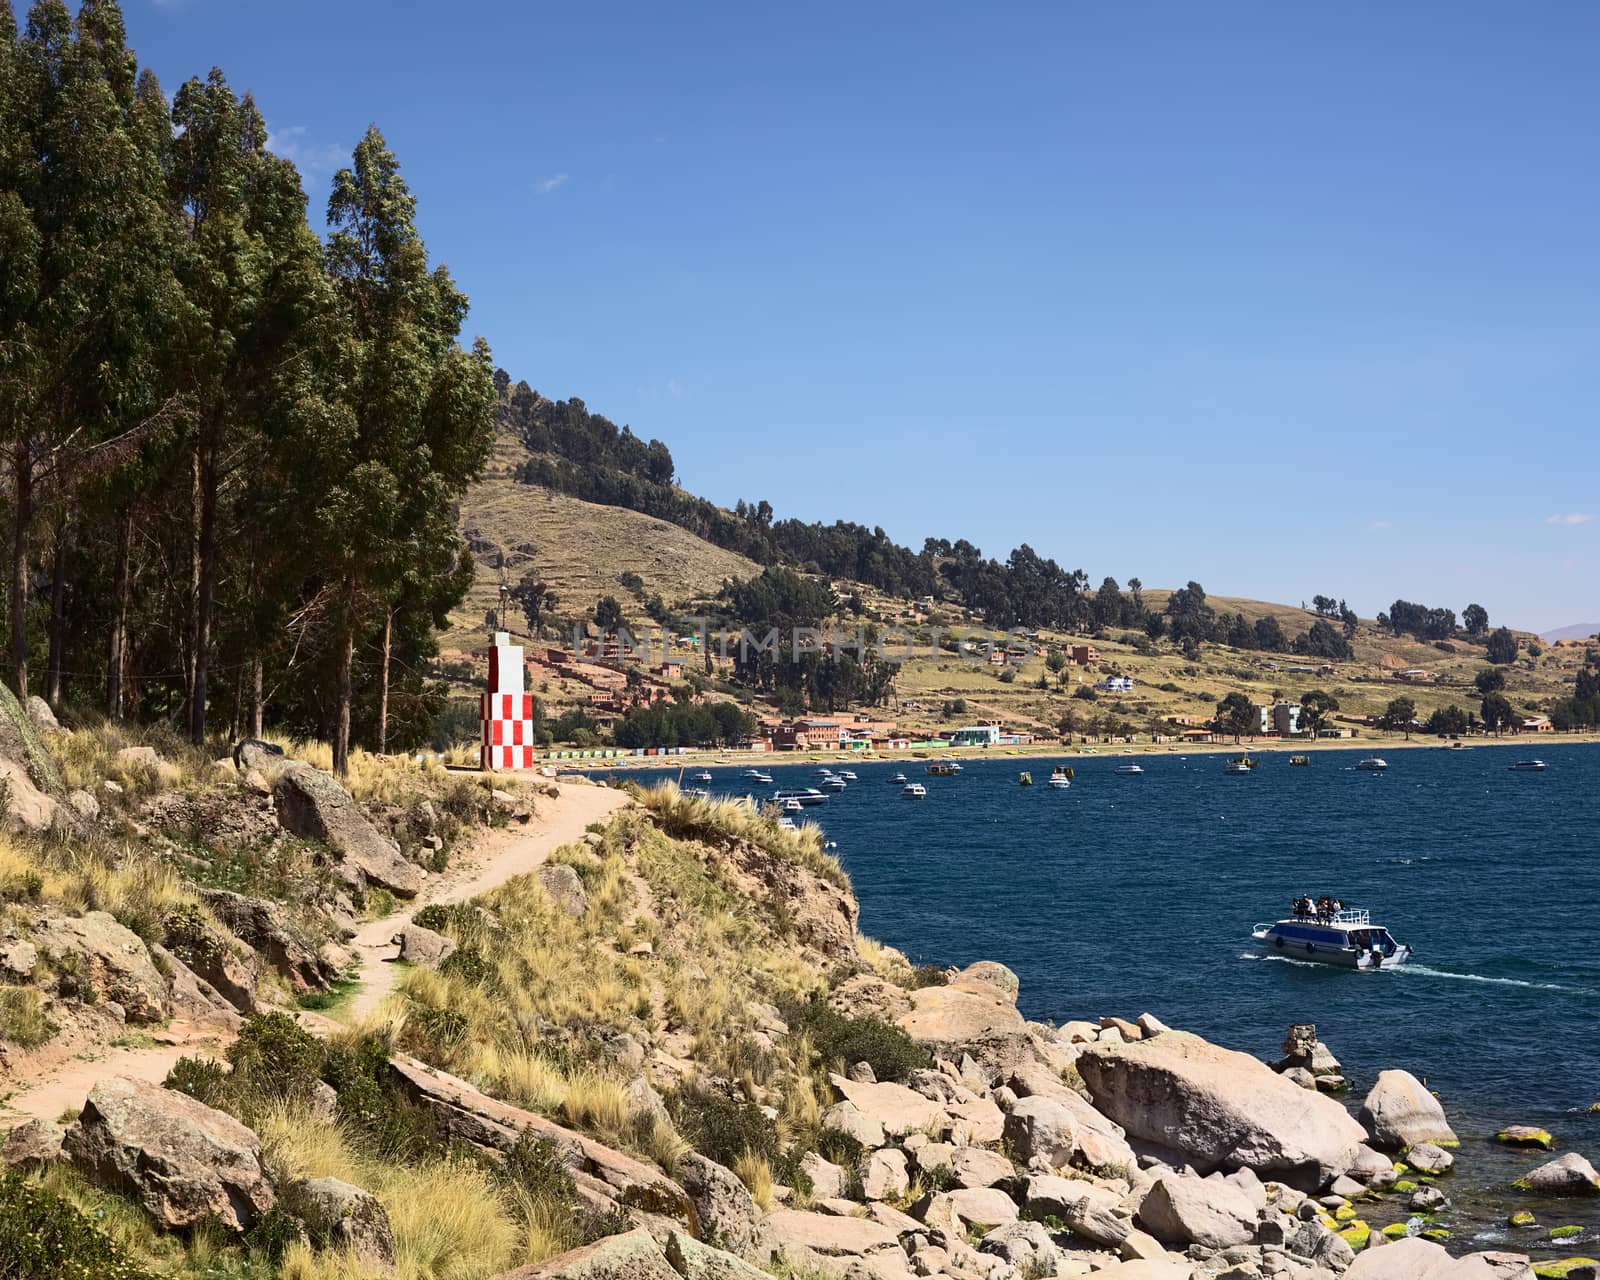 COPACABANA, BOLIVIA - OCTOBER 17, 2014: Beacon on the shore of Lake Titicaca at the small tourist town on October 17, 2014 in Copacabana, Bolivia. In the back a tour boat is entering the bay of Copacabana. 